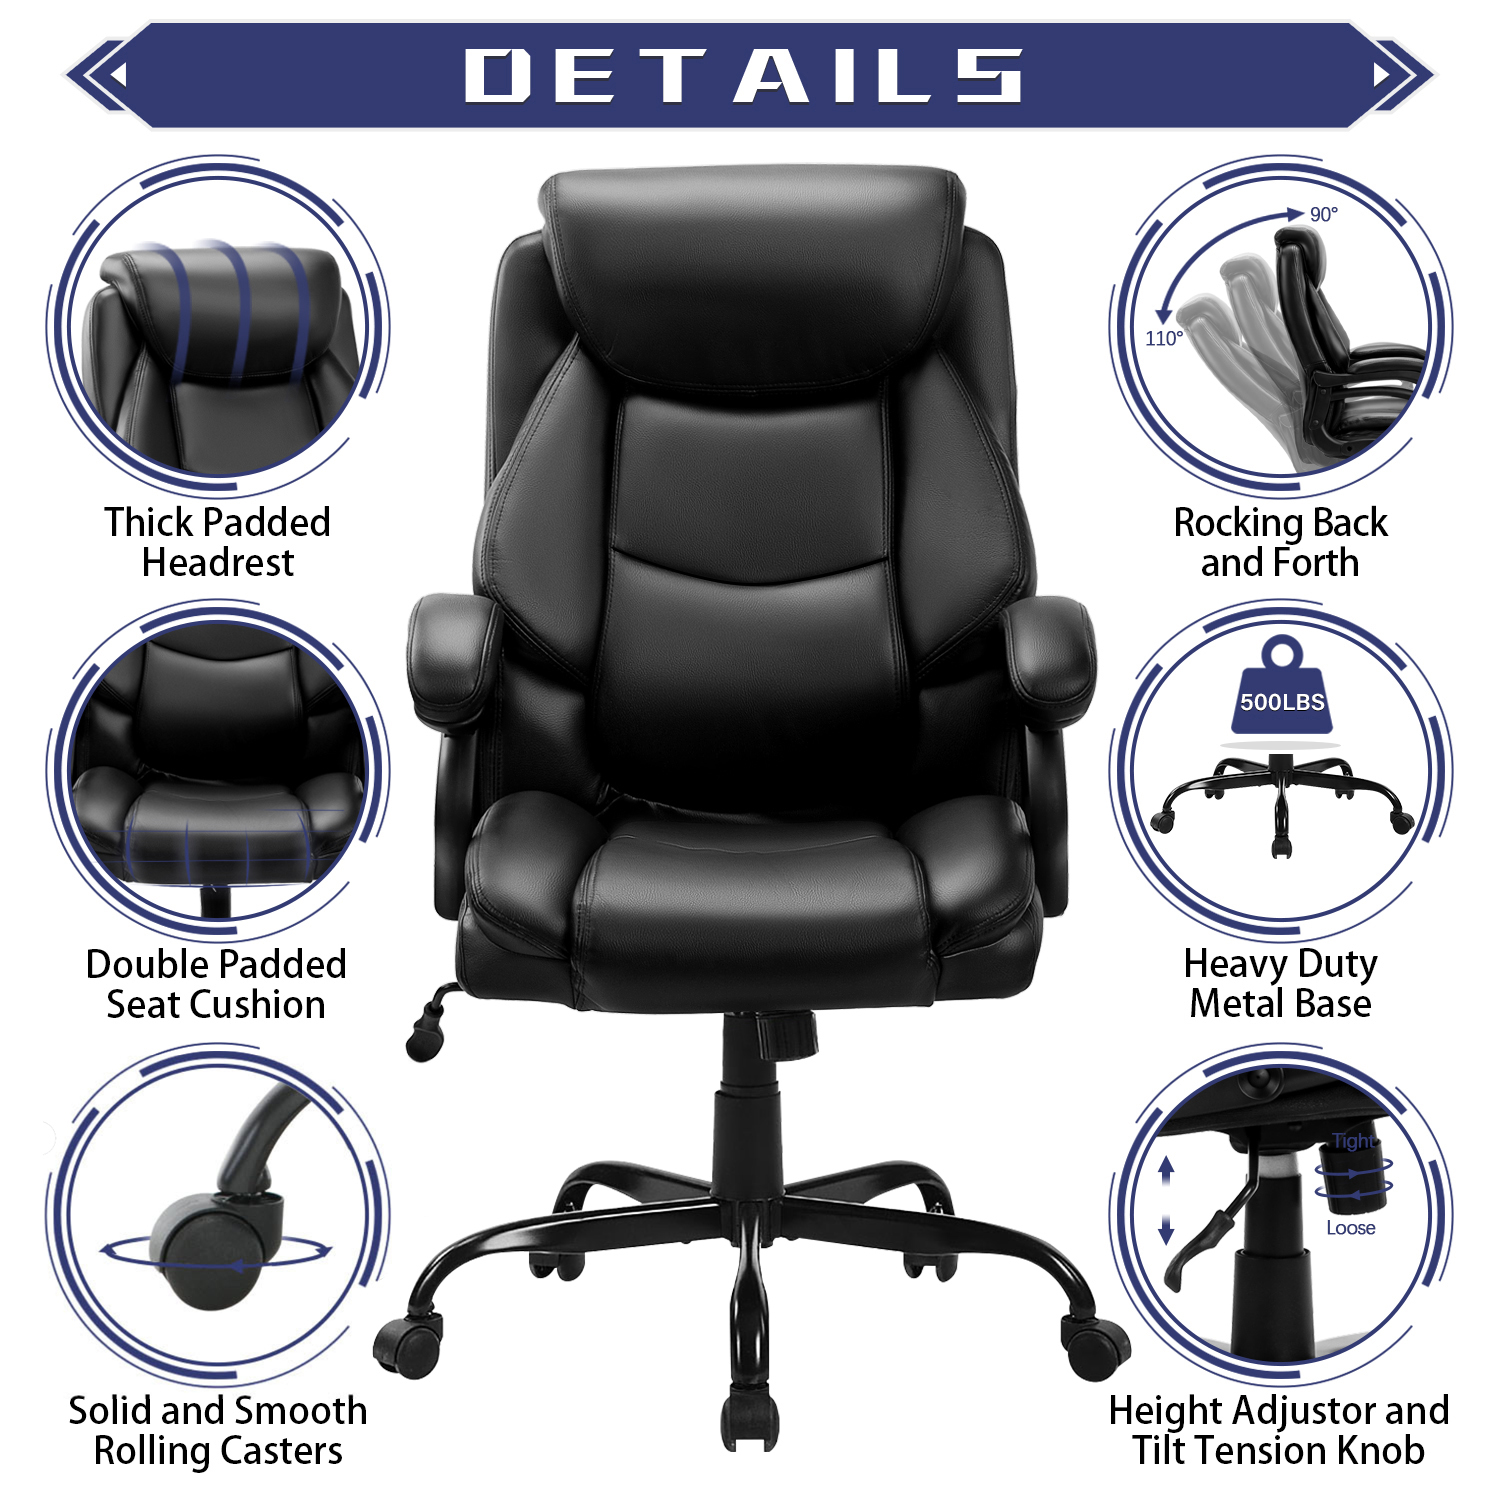 JONPONY  Big and Tall Office Chair 500LBS Wide Seat Ergonomic Computer Desk Chair High Back Executive Leather Chair Adjustable Task Chair Lumbar Back Support 8 Hours Heavy Duty Design,Black - image 2 of 7